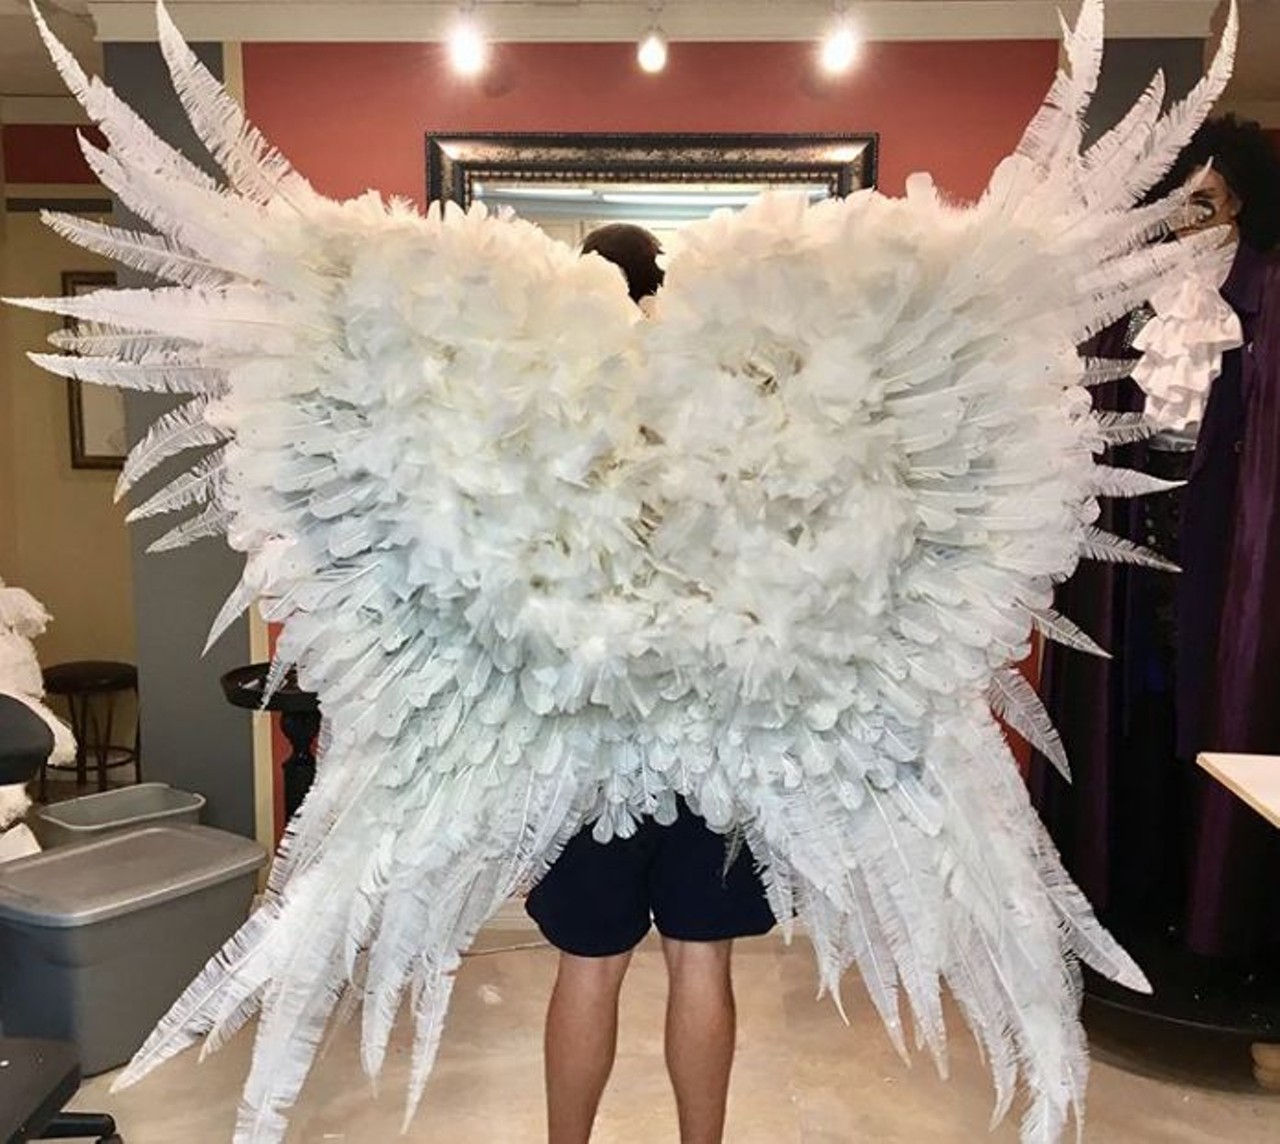 Costume Couture  
3510 S. Orange Ave., 407-270-7360
Be that &#147;extra&#148; friend at Halloween this year by donning an outlandish and over-the-top costume designed by this local business.
Photo via themrglitter / Instagram